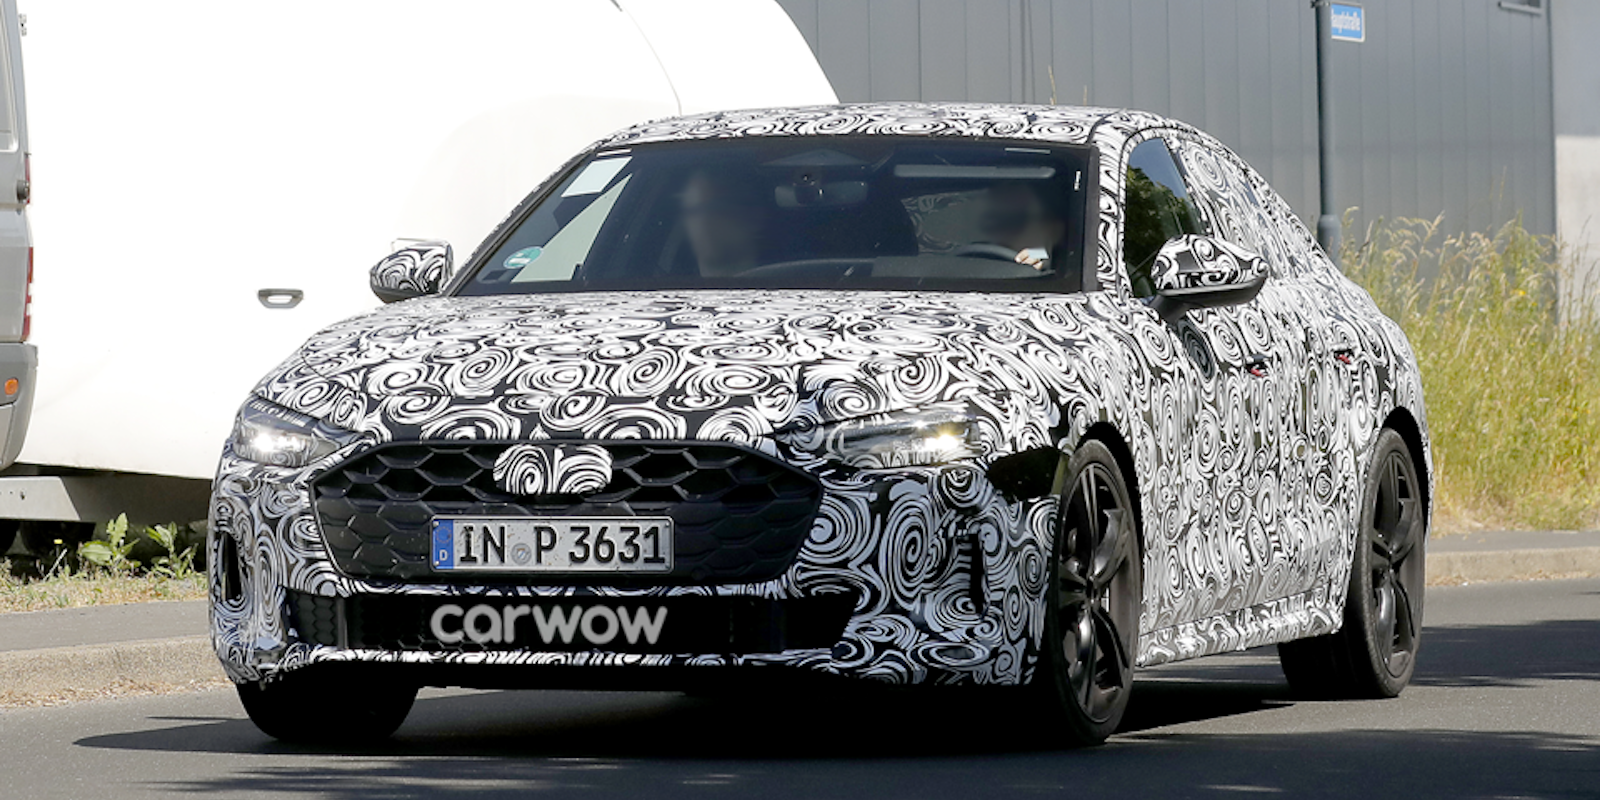 New Audi S5 spotted: everything we know so far